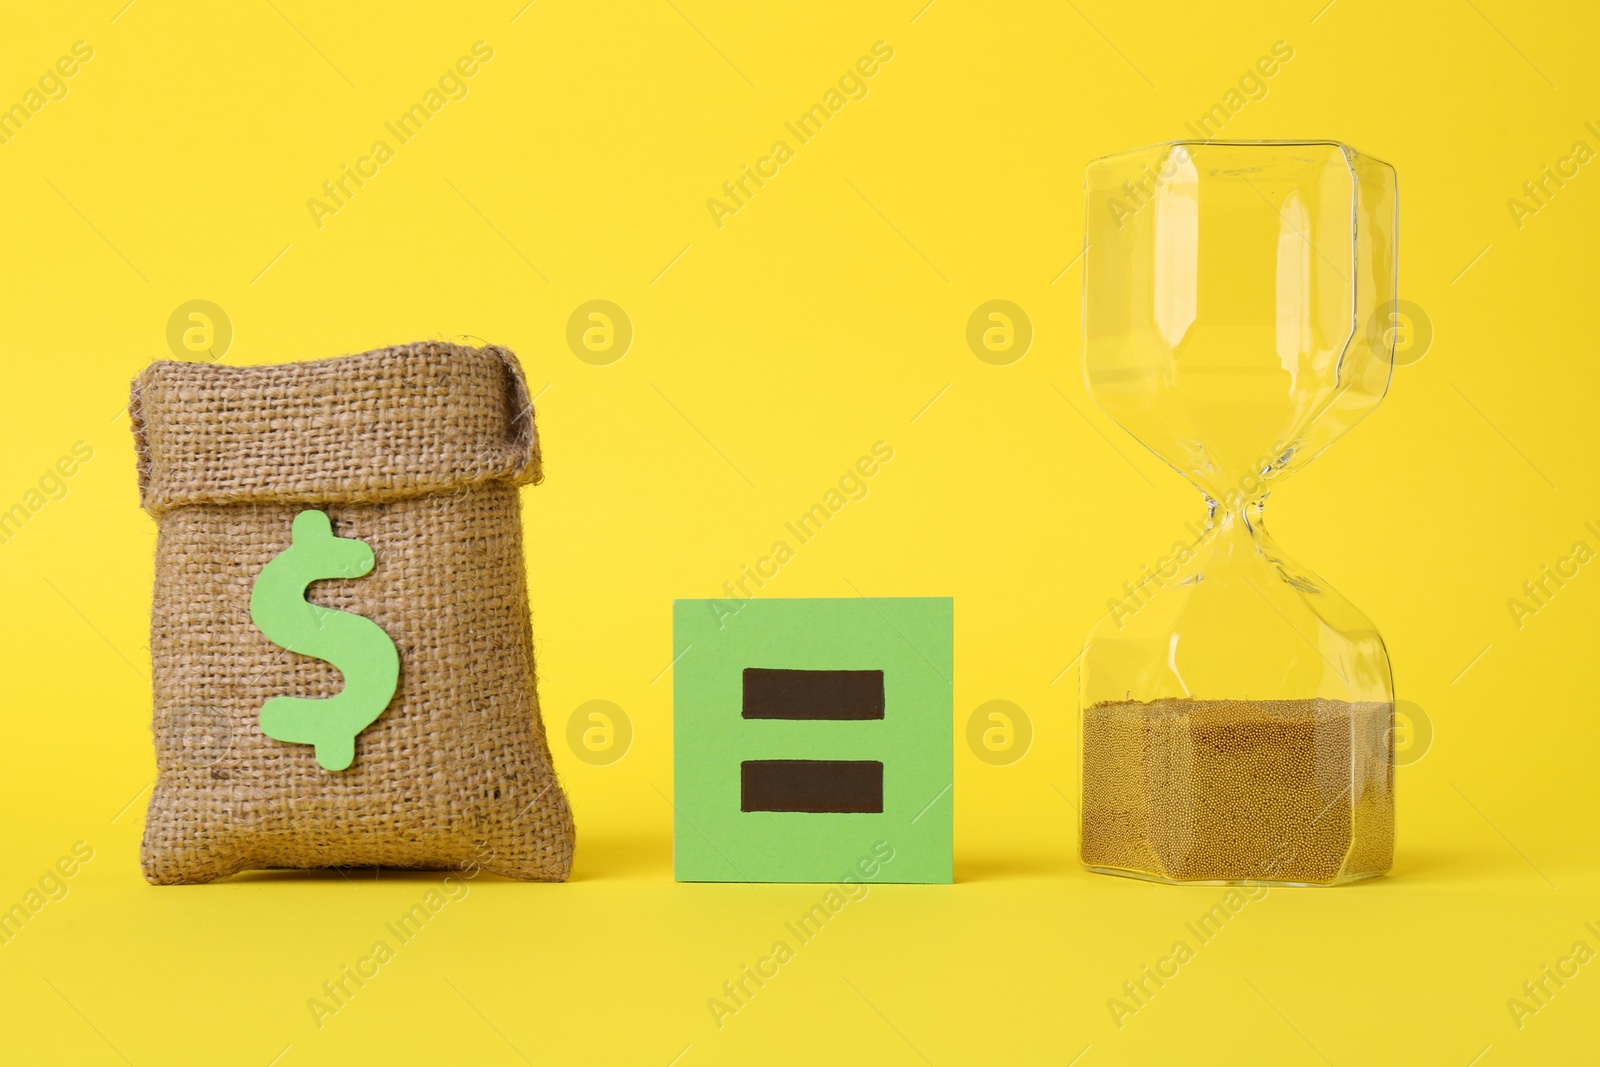 Photo of Burlap sack of money, hourglass with sand and equals sign on yellow background